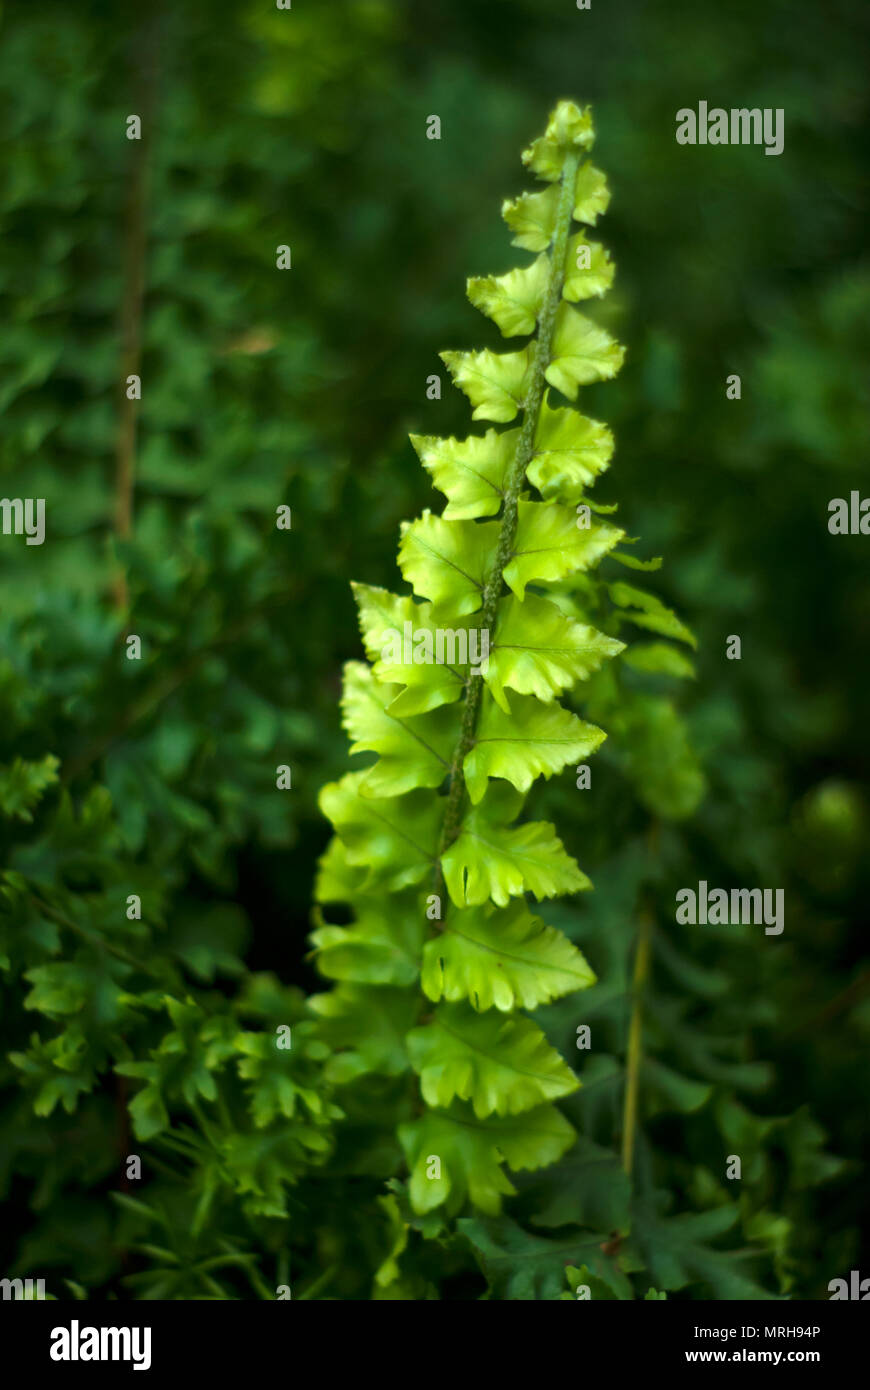 bright green juicy fresh leaf of fern (actually hepatic moss Jungermannia lycopodioides) on a dark blurry plant background Stock Photo